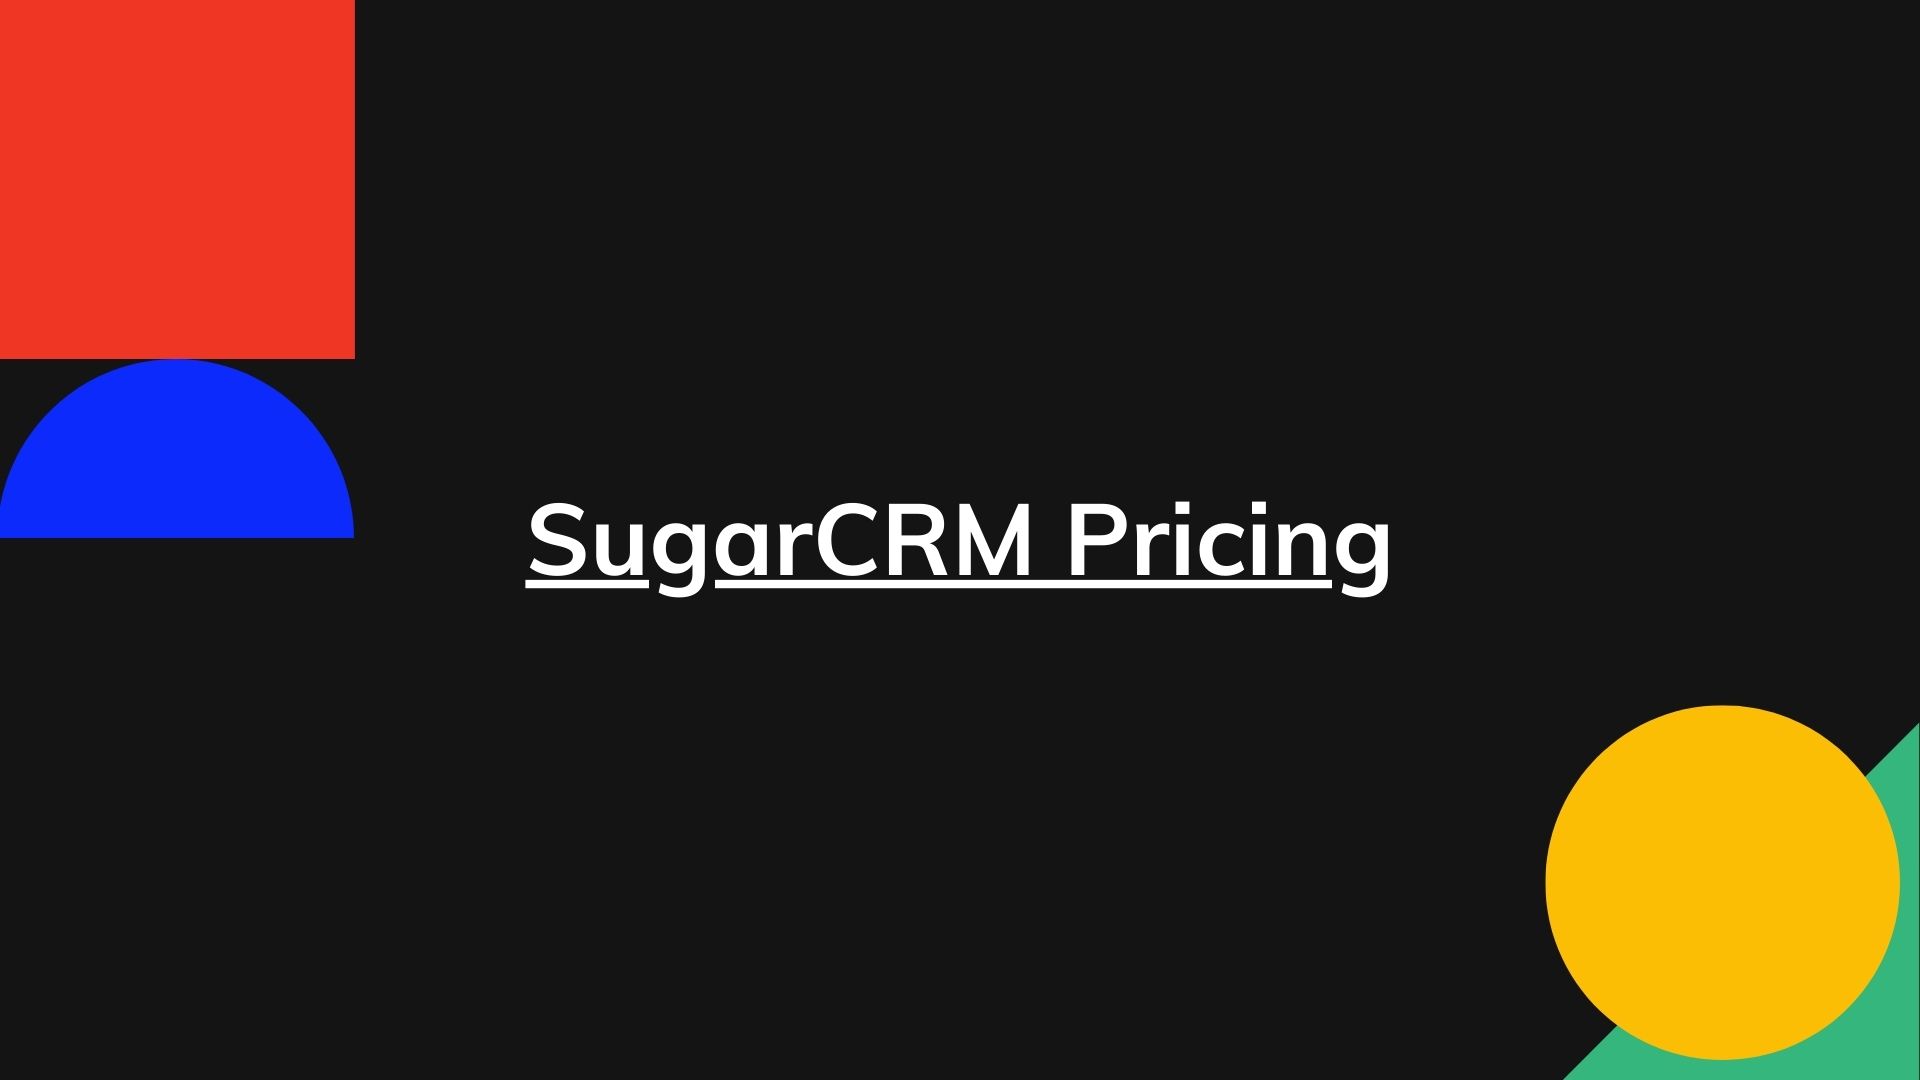 SugarCRM Pricing Actual Prices For All Plans + Enterprise